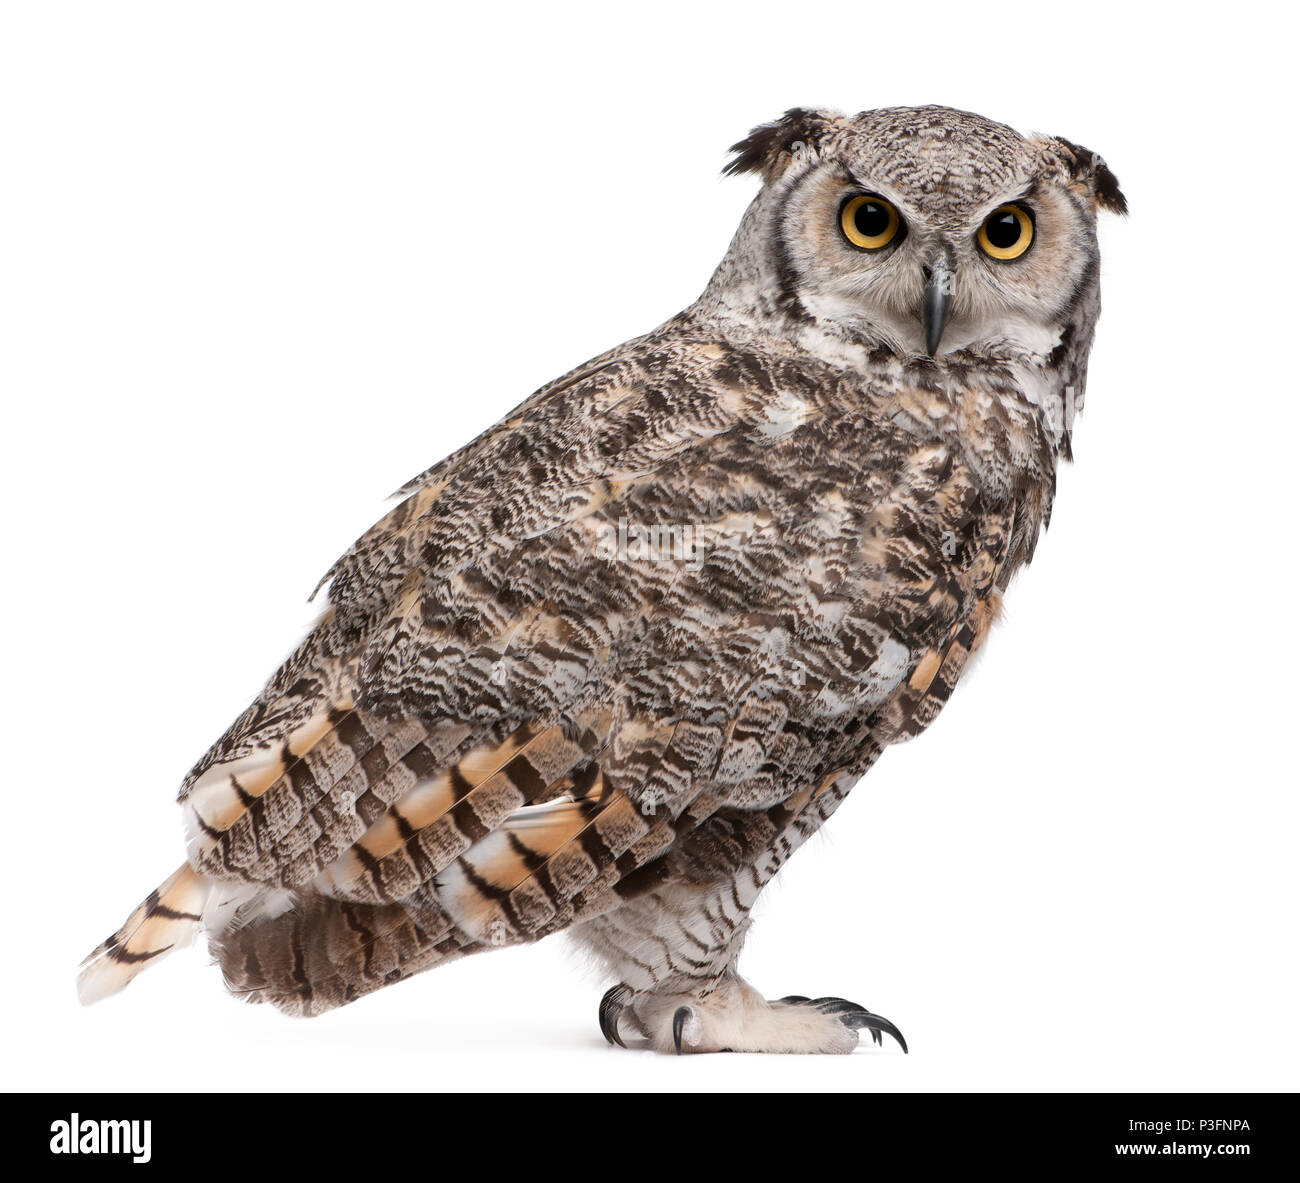 Great Horned Owl, Bubo Virginianus Subarcticus, in front of white background Stock Photo